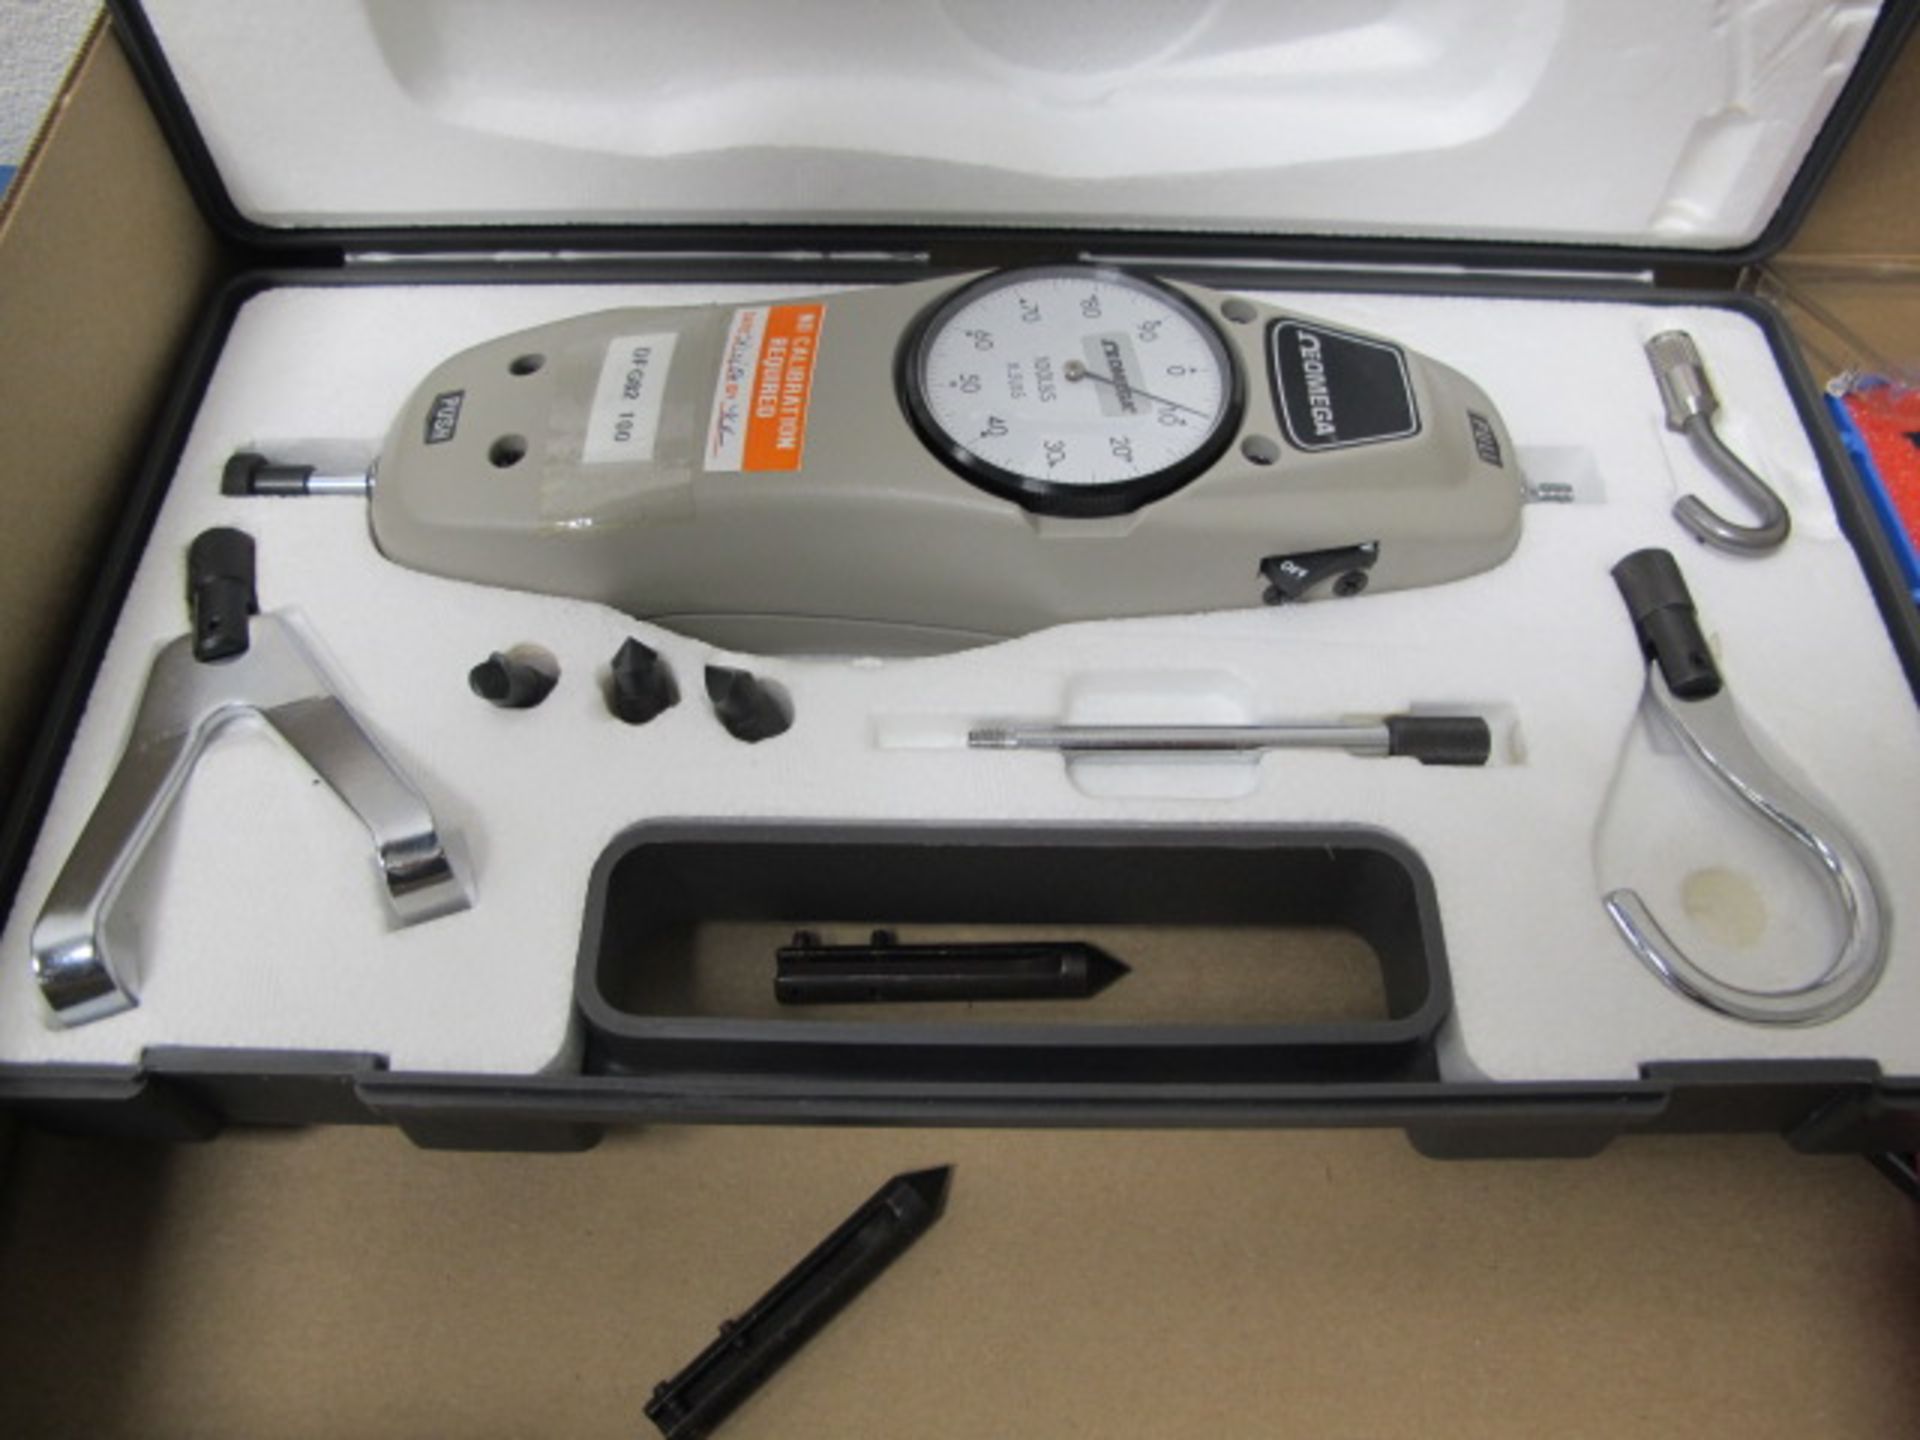 Omega Dial Force Gage - Image 2 of 3